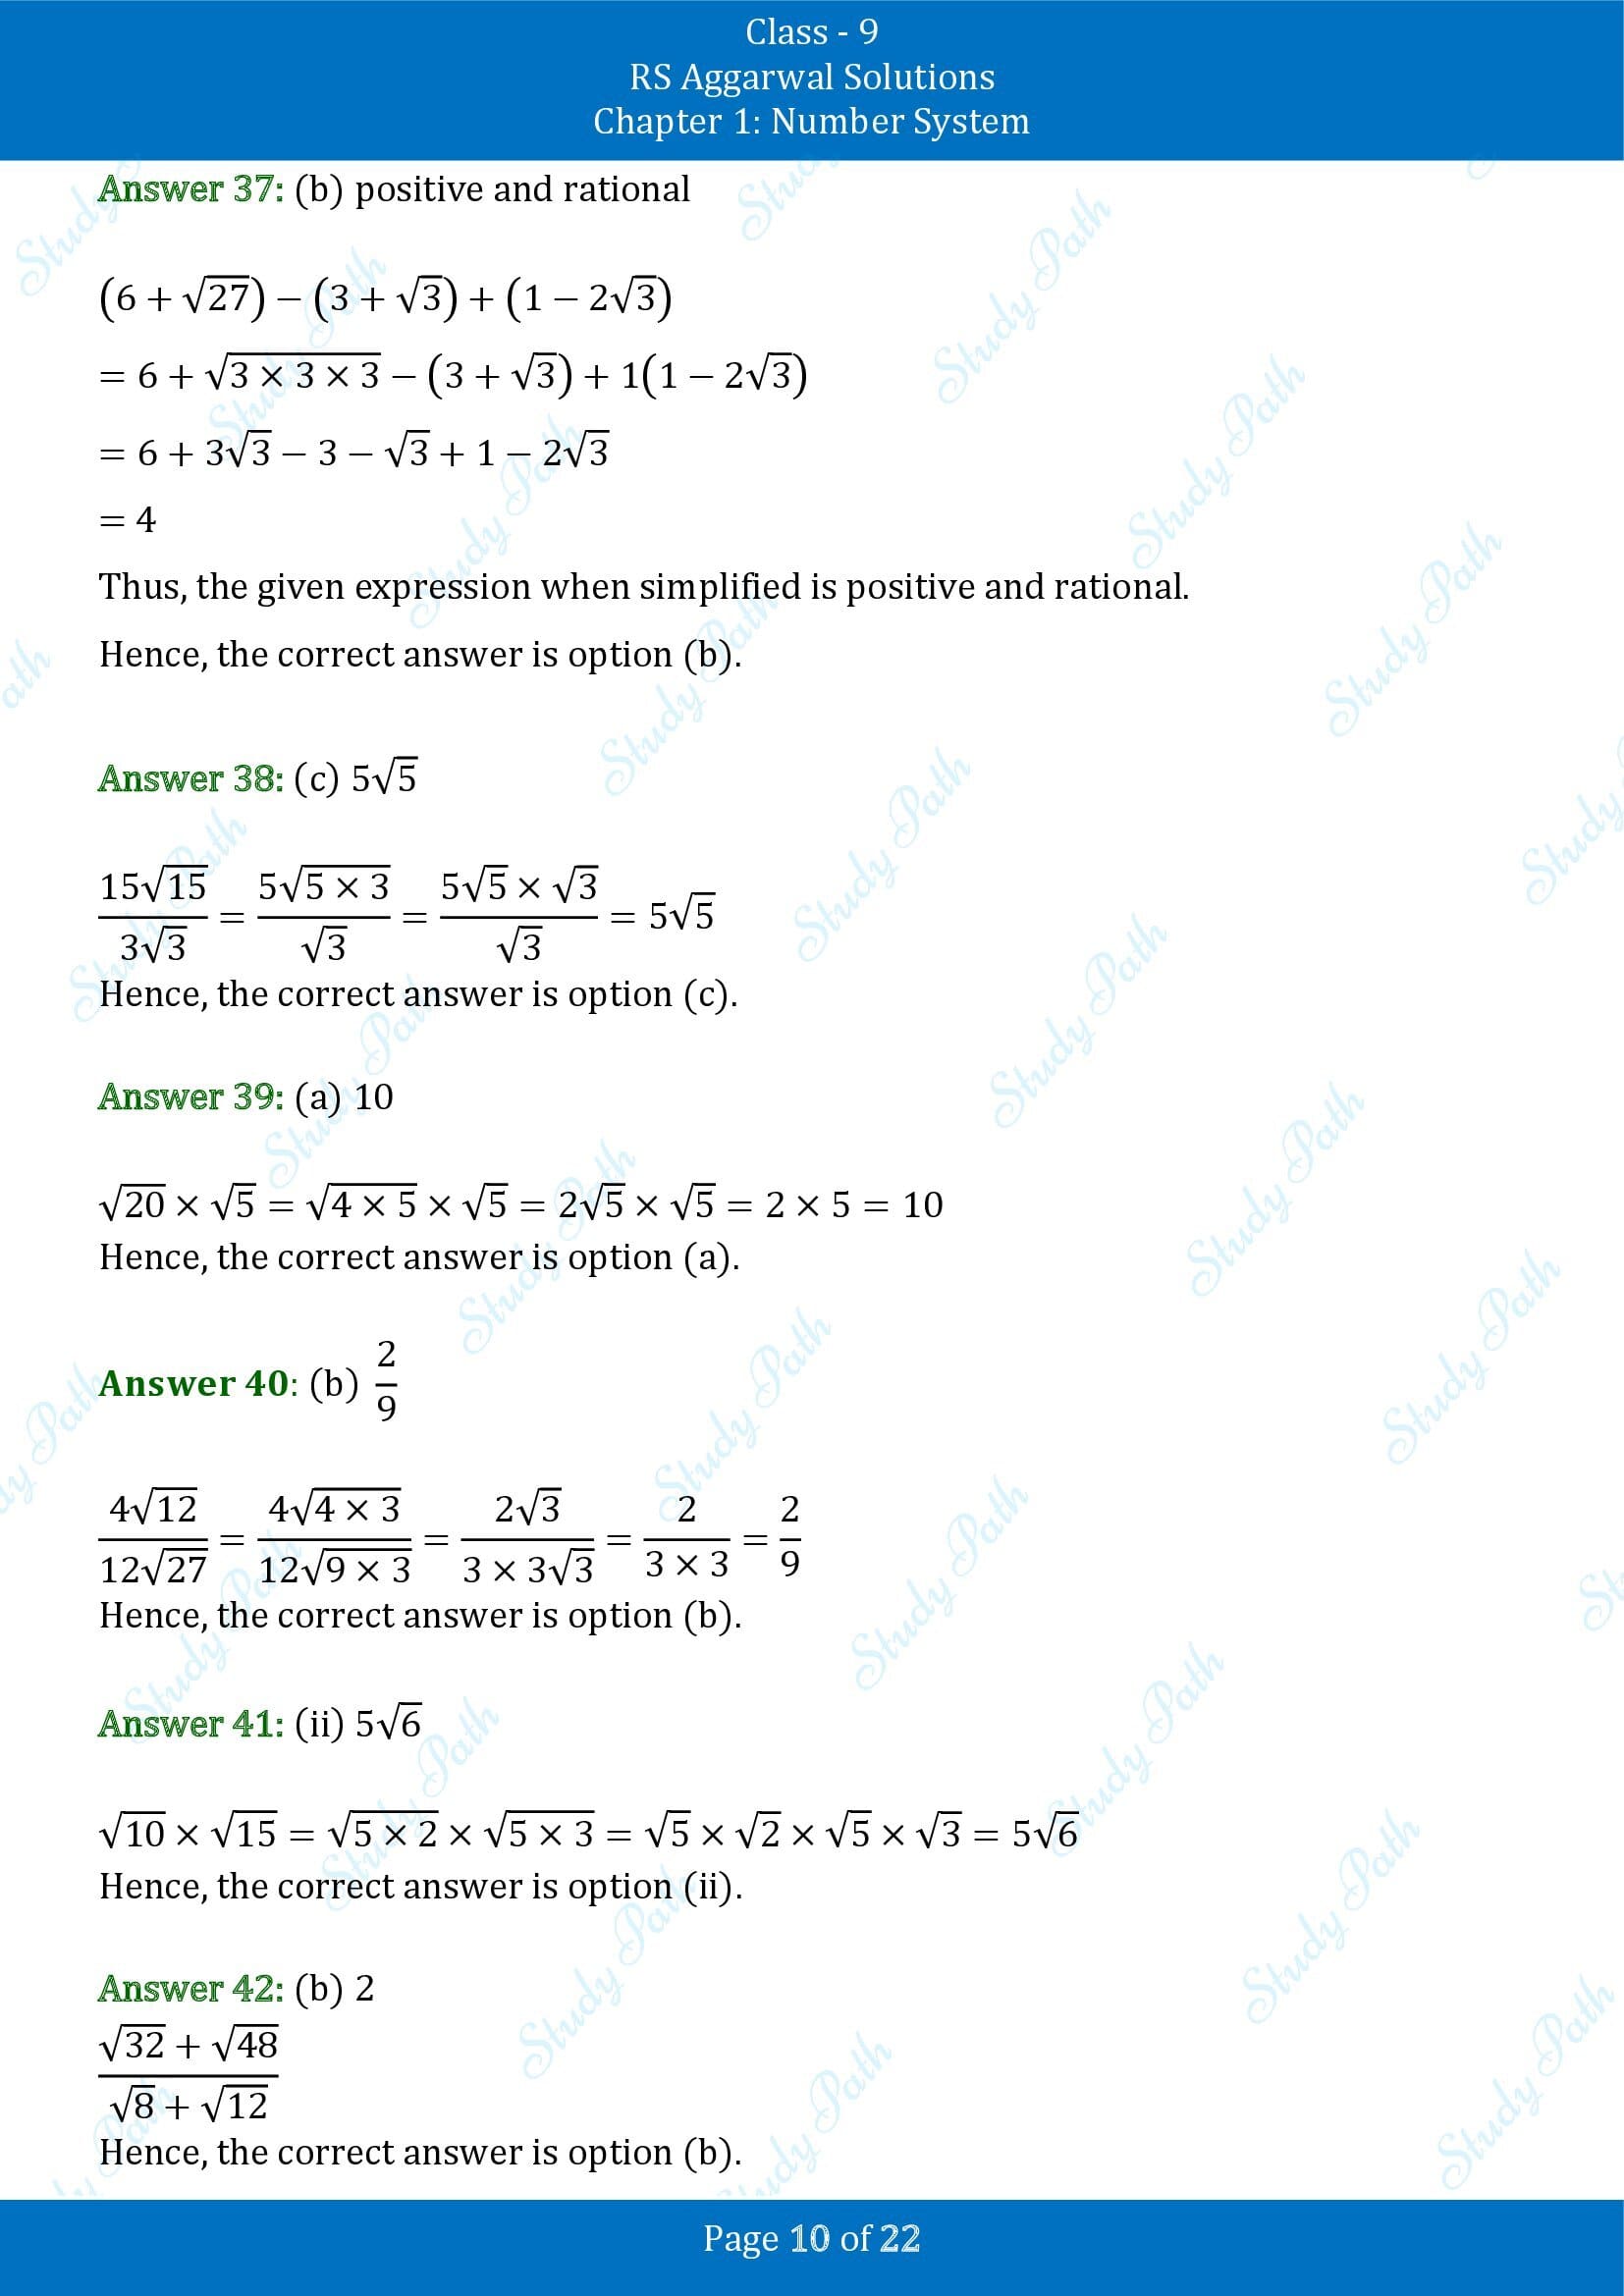 RS Aggarwal Solutions Class 9 Chapter 1 Number System Multiple Choice Questions MCQs 00010